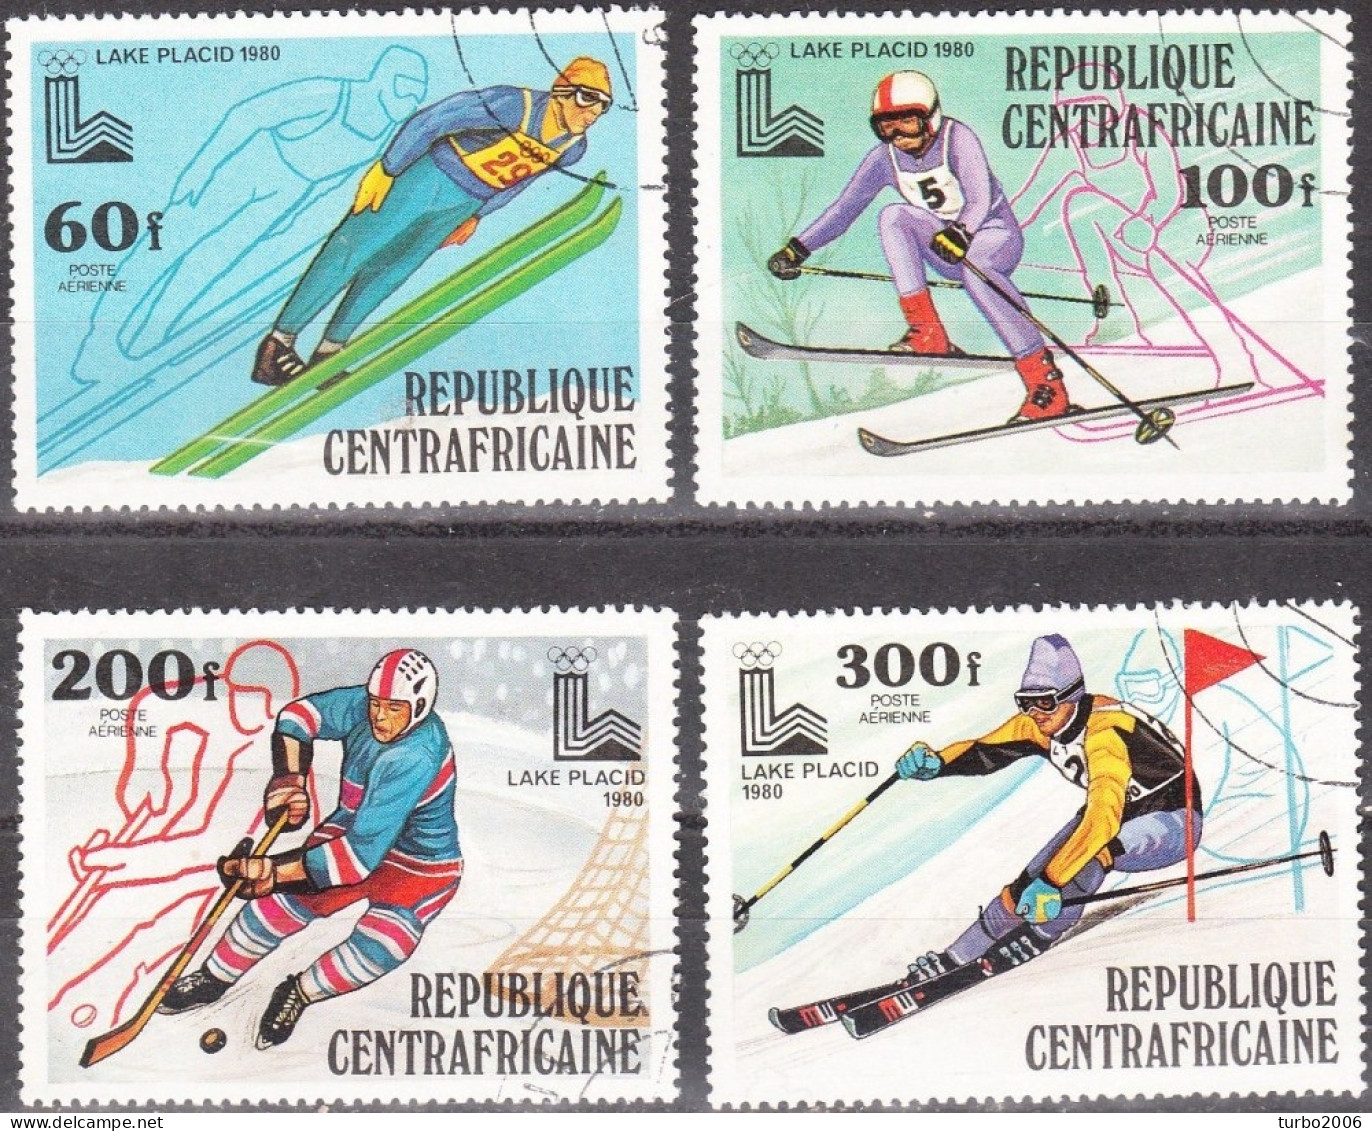 Republique Centrafricaine 1962-1979 airplanes, sport, insects etc. 10 sets + 3 blocks used / MNH as shown